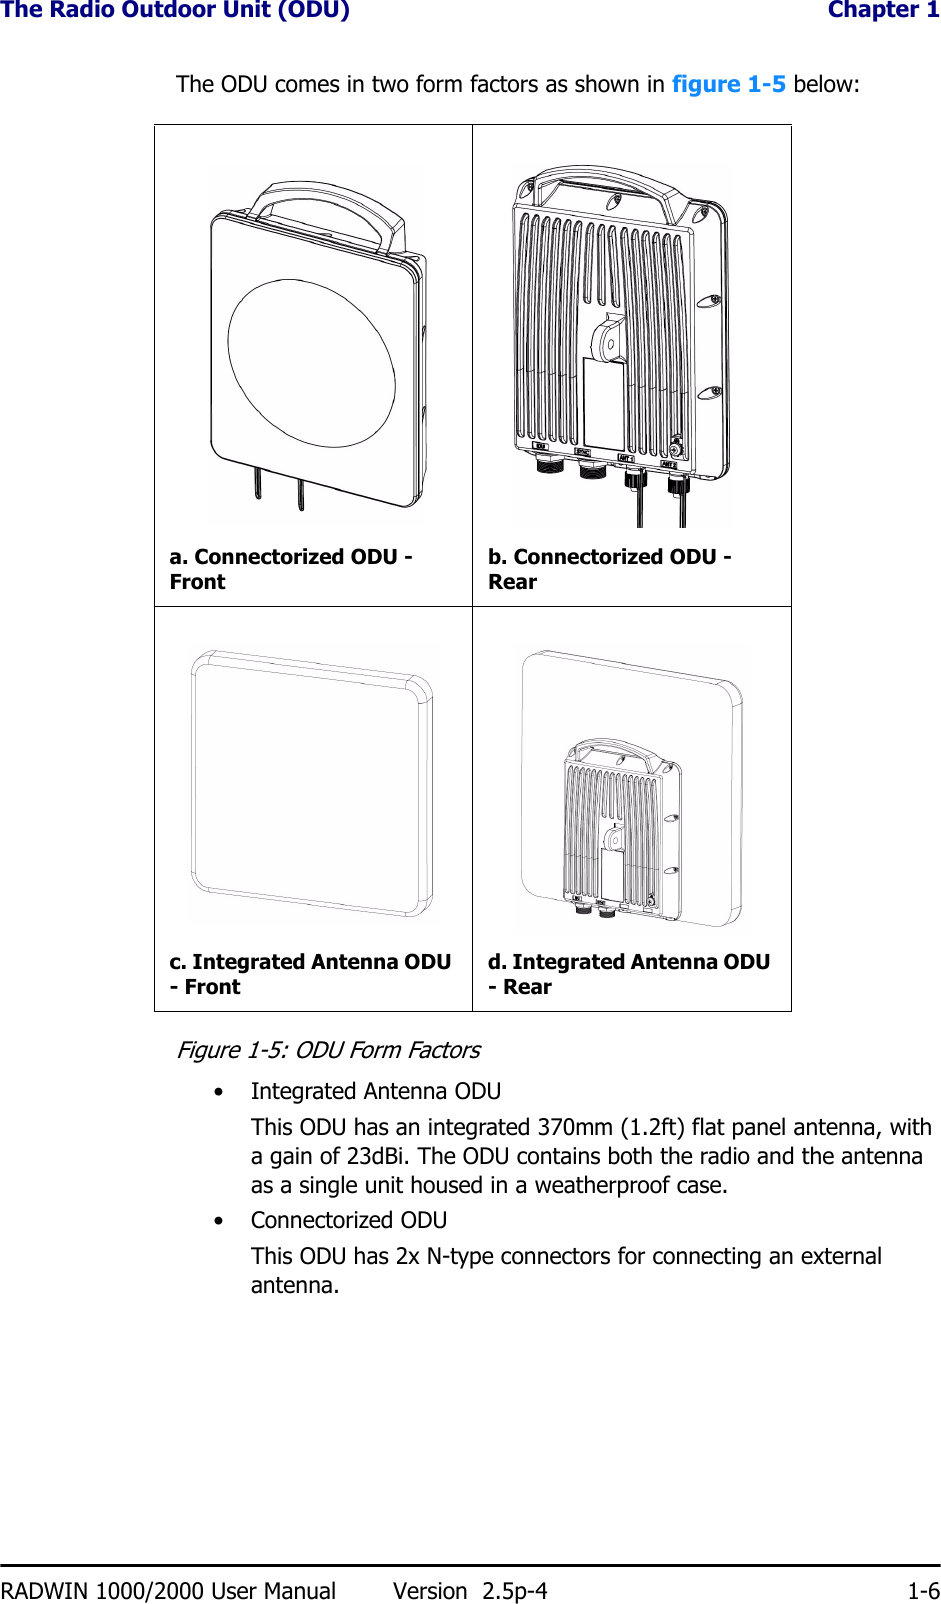 The Radio Outdoor Unit (ODU)  Chapter 1RADWIN 1000/2000 User Manual Version  2.5p-4 1-6The ODU comes in two form factors as shown in figure 1-5 below:Figure 1-5: ODU Form Factors• Integrated Antenna ODUThis ODU has an integrated 370mm (1.2ft) flat panel antenna, with a gain of 23dBi. The ODU contains both the radio and the antenna as a single unit housed in a weatherproof case.•Connectorized ODUThis ODU has 2x N-type connectors for connecting an external antenna.a. Connectorized ODU - Frontb. Connectorized ODU - Rearc. Integrated Antenna ODU - Frontd. Integrated Antenna ODU - Rear